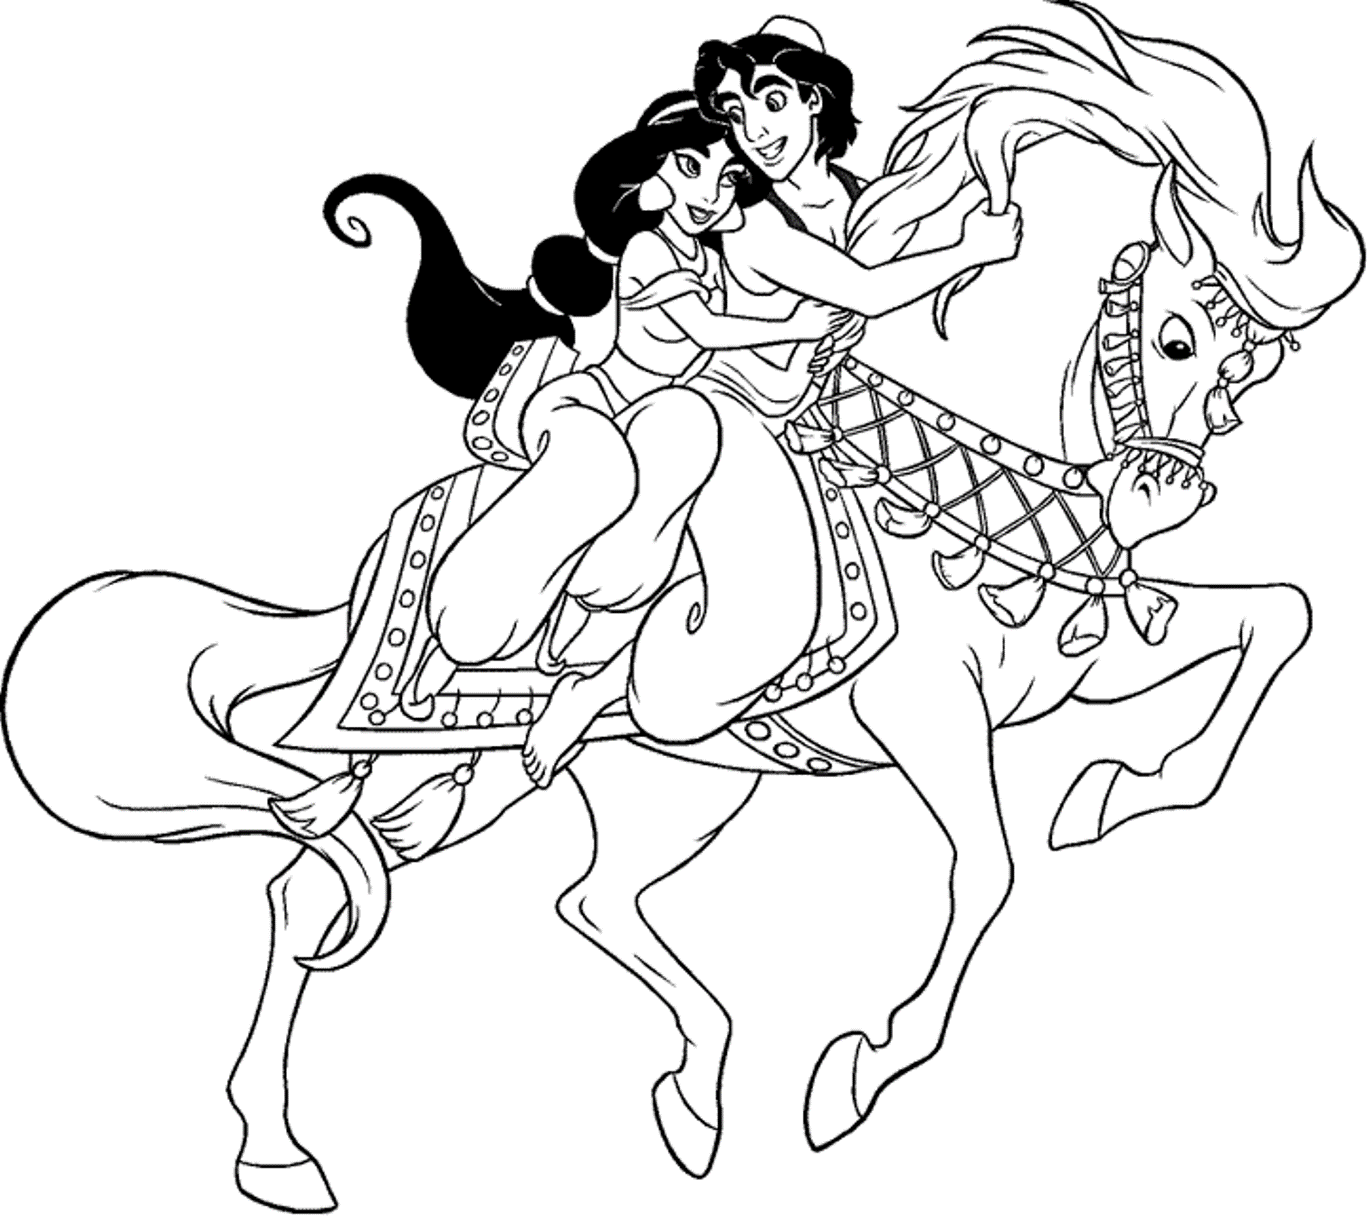 Disney Coloring Pages Pdf - Coloring Home